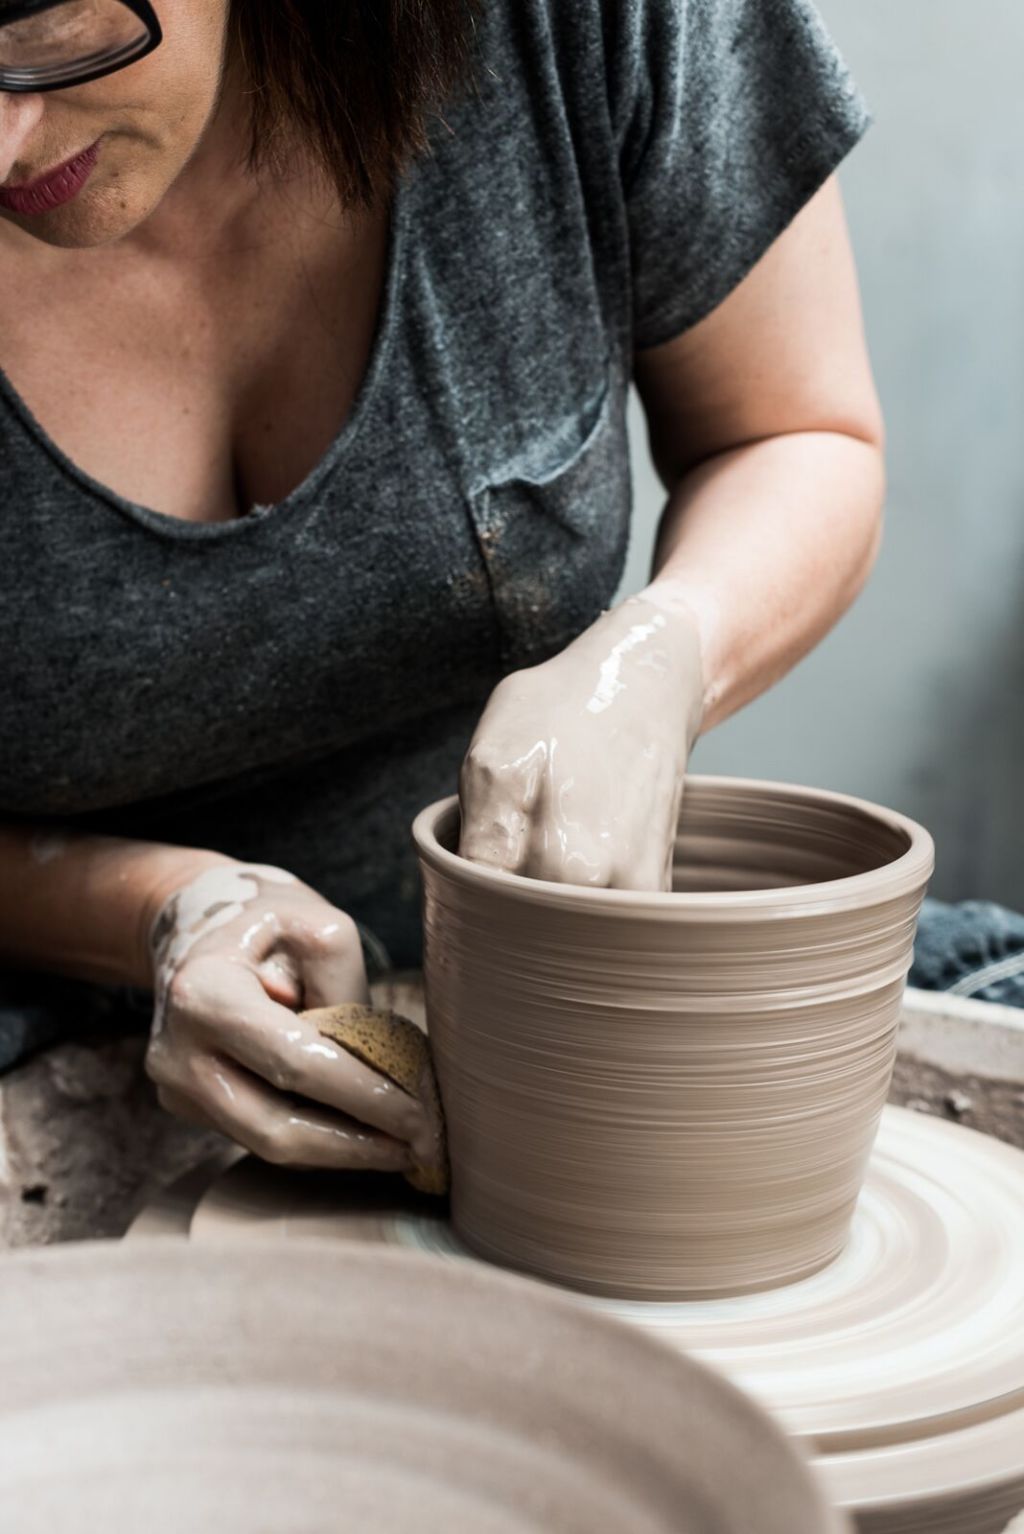 Sarah Schembri likens pottery to meditation and says 'it's a beautiful way to centre the mind'. Photo: Carmen Zammit